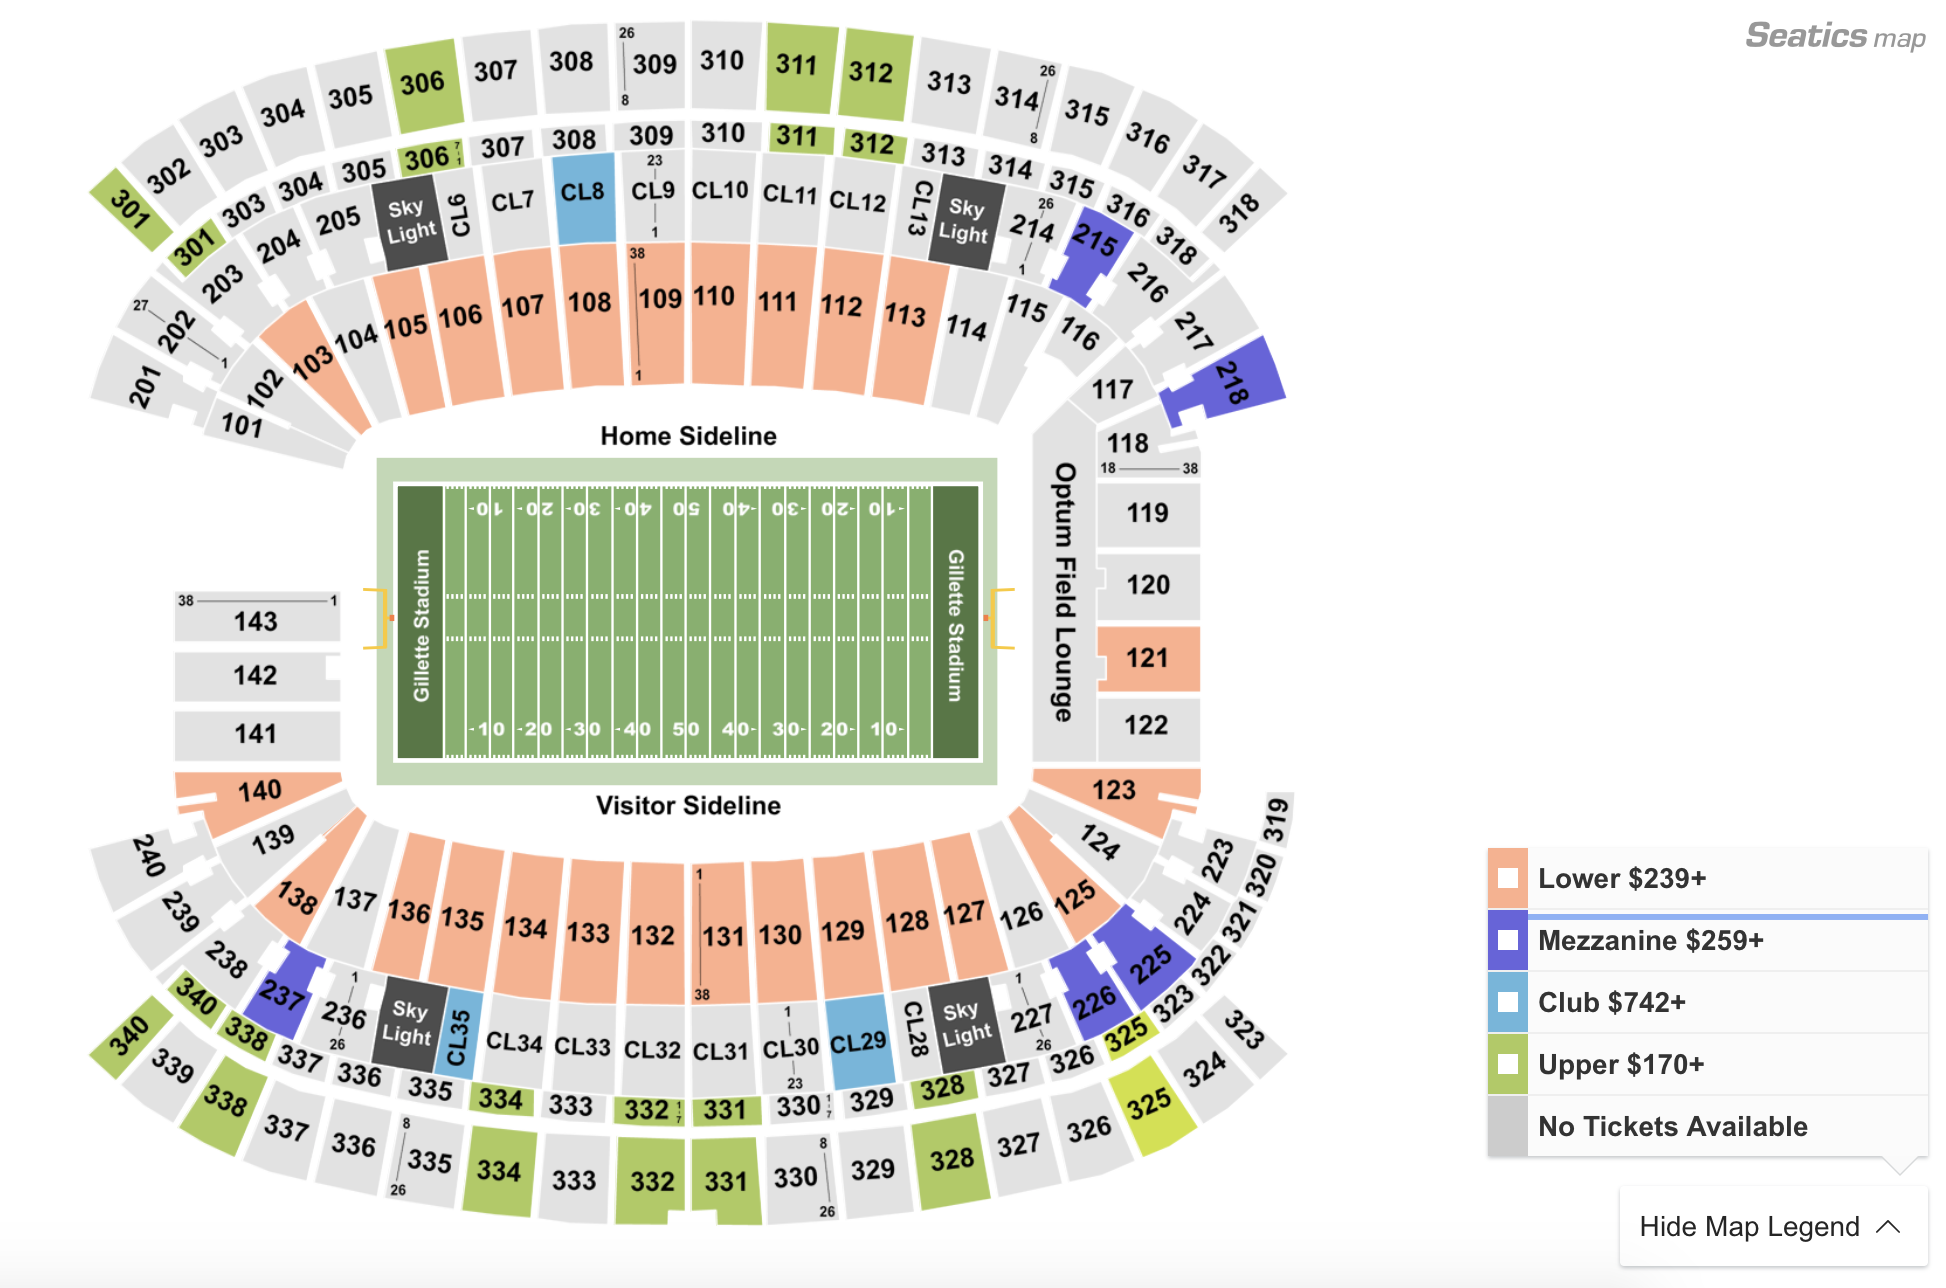 How To Find The Cheapest Bills Vs. Patriots Tickets In 2019